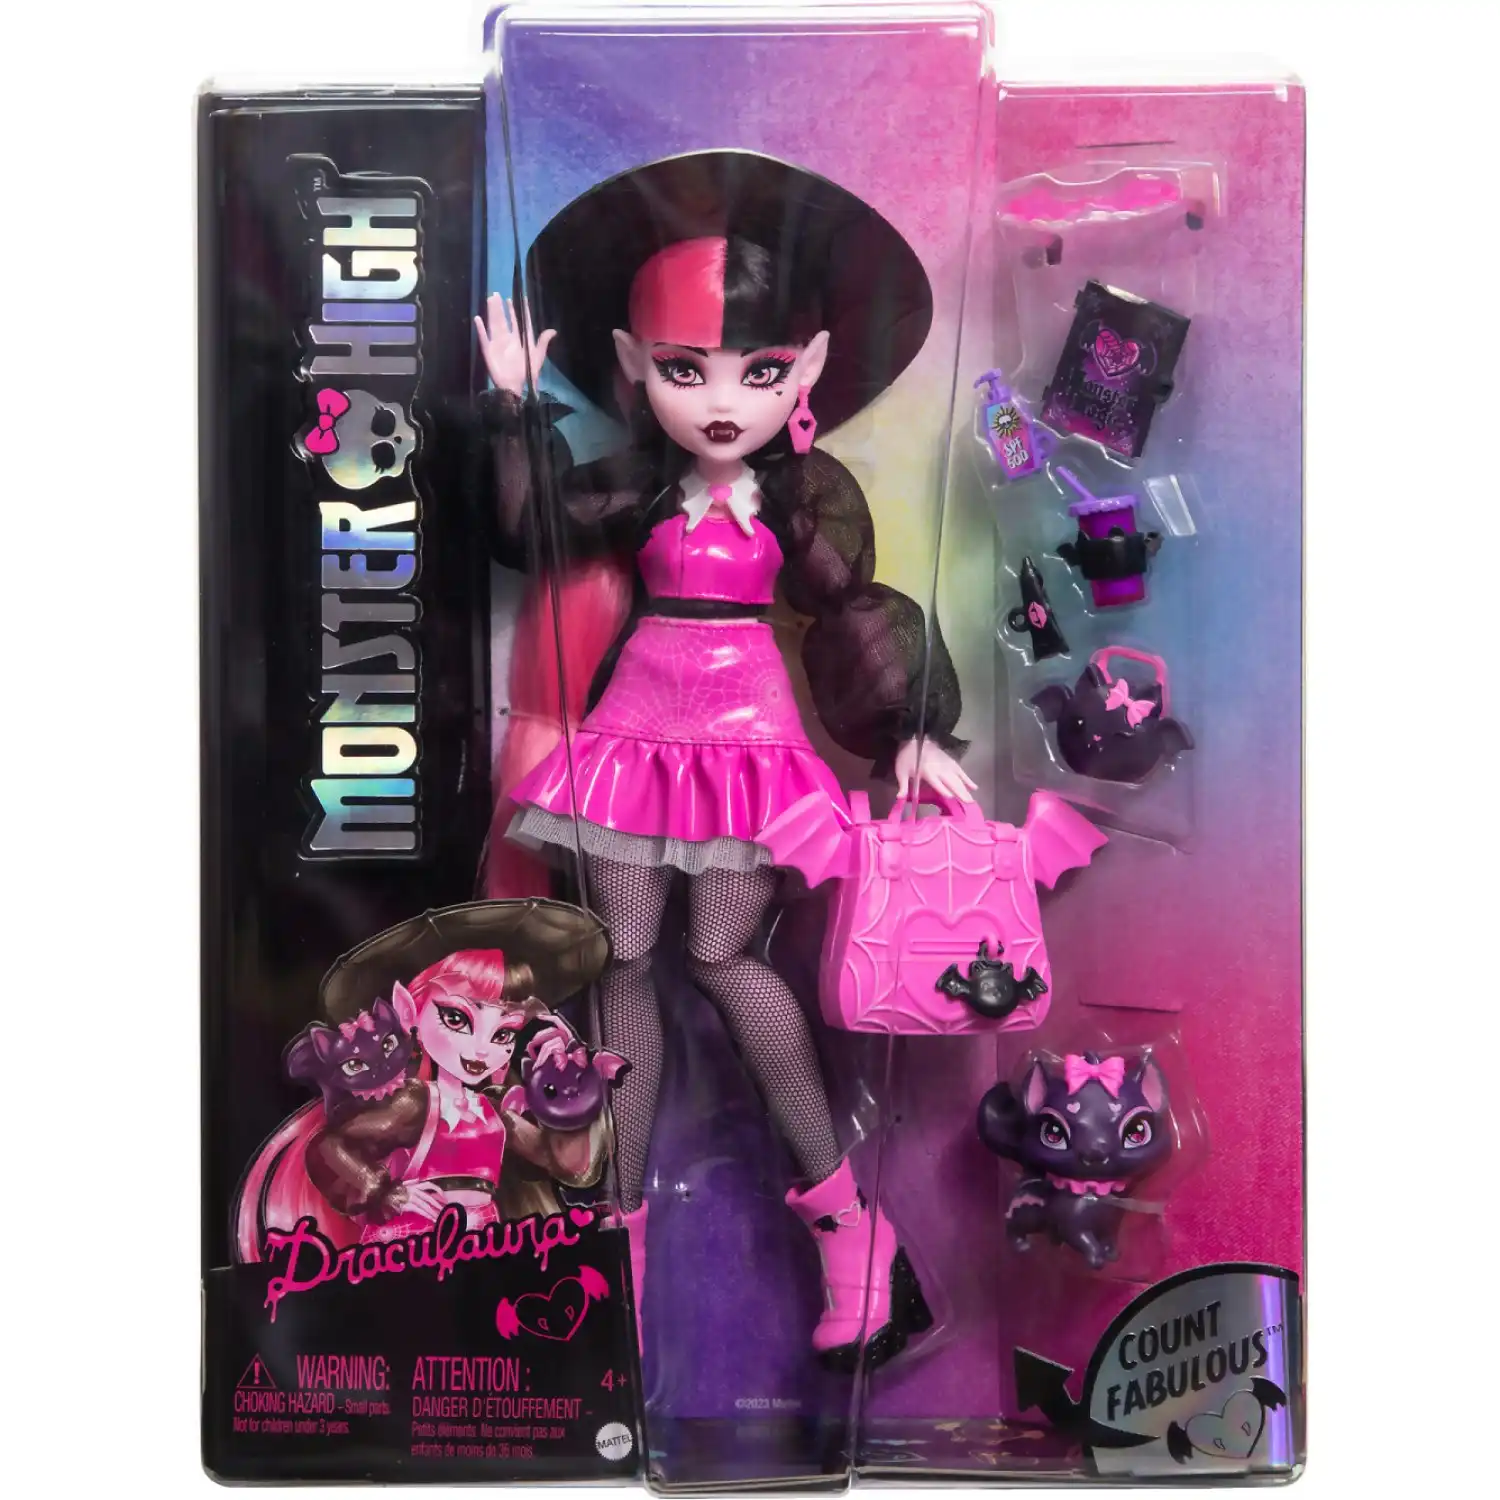 Monster High - Draculaura Fashion Doll With Pet Count Fabulous And Accessories - Mattel